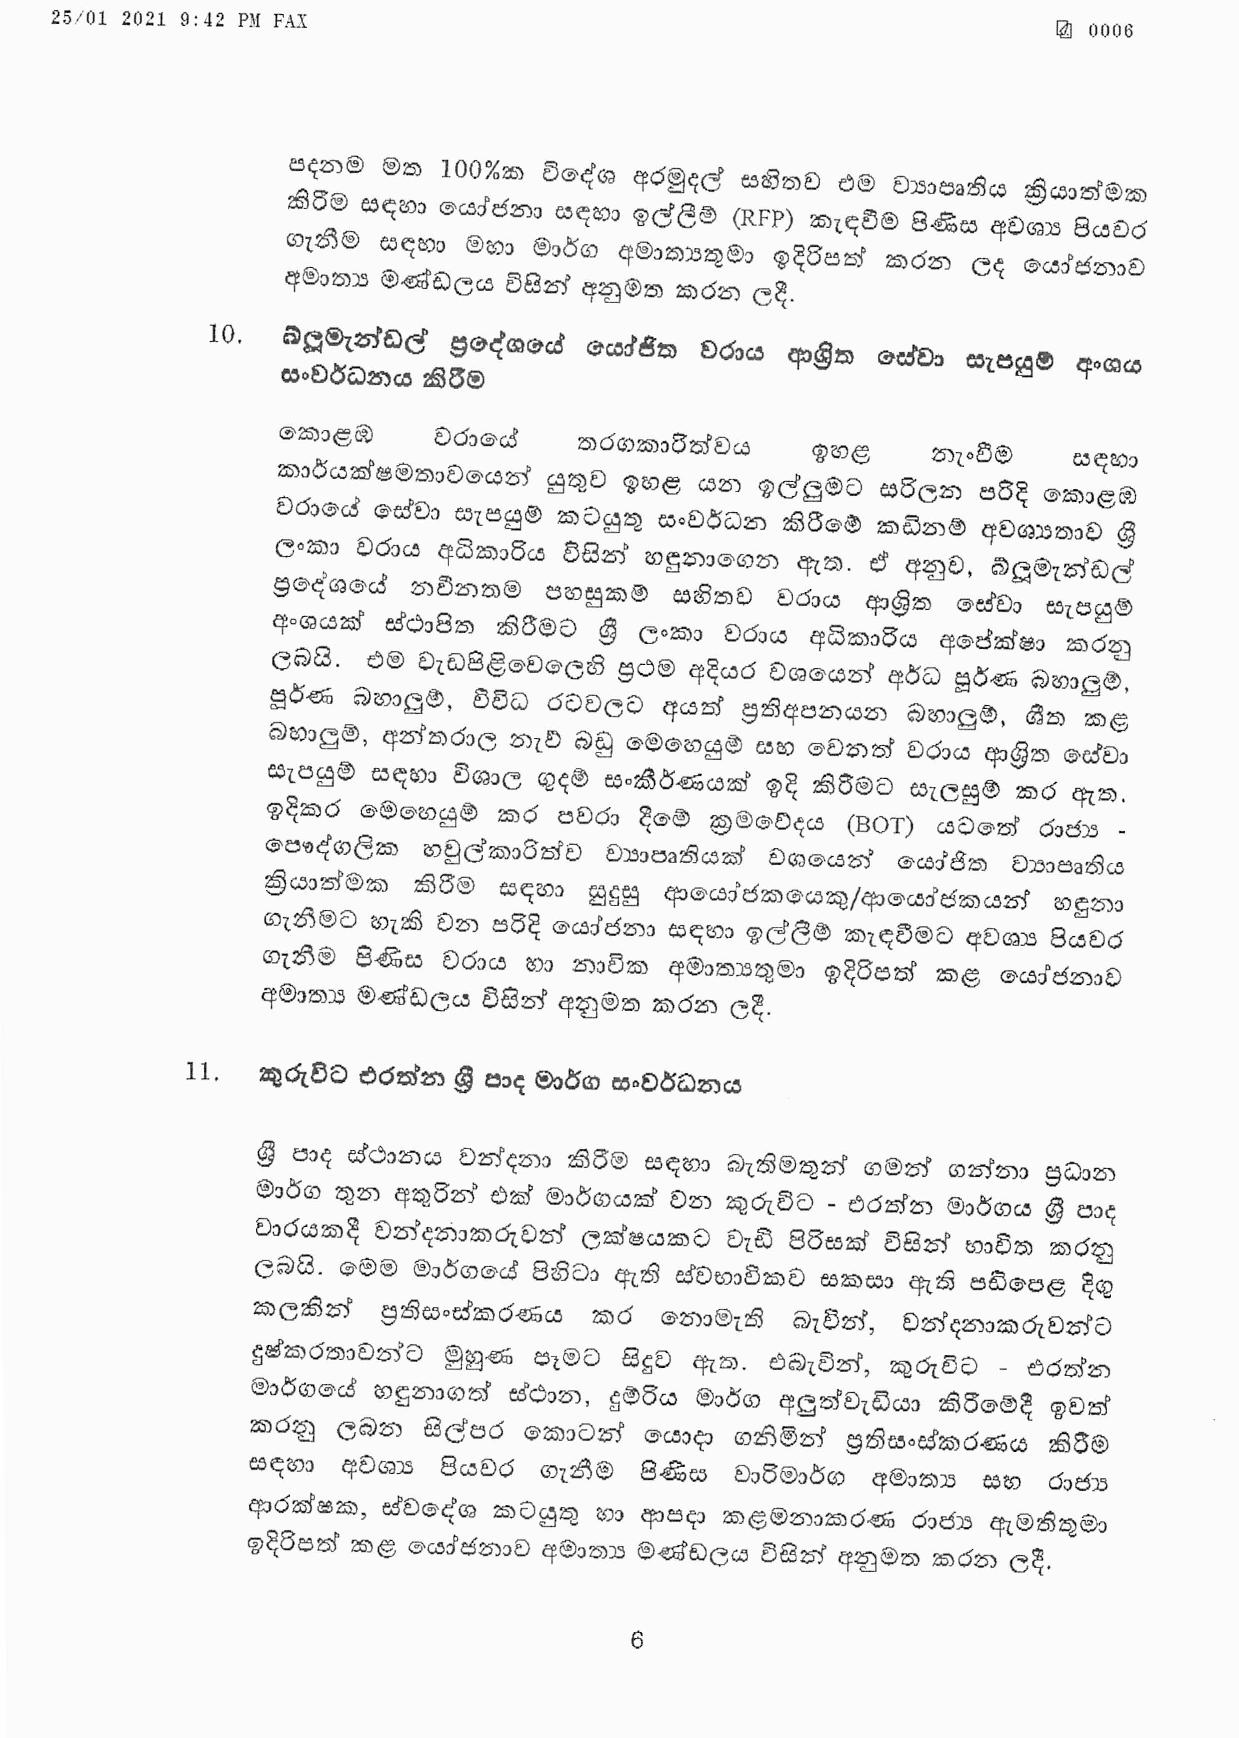 Cabinet Decision on 25.01.2021 1 page 006